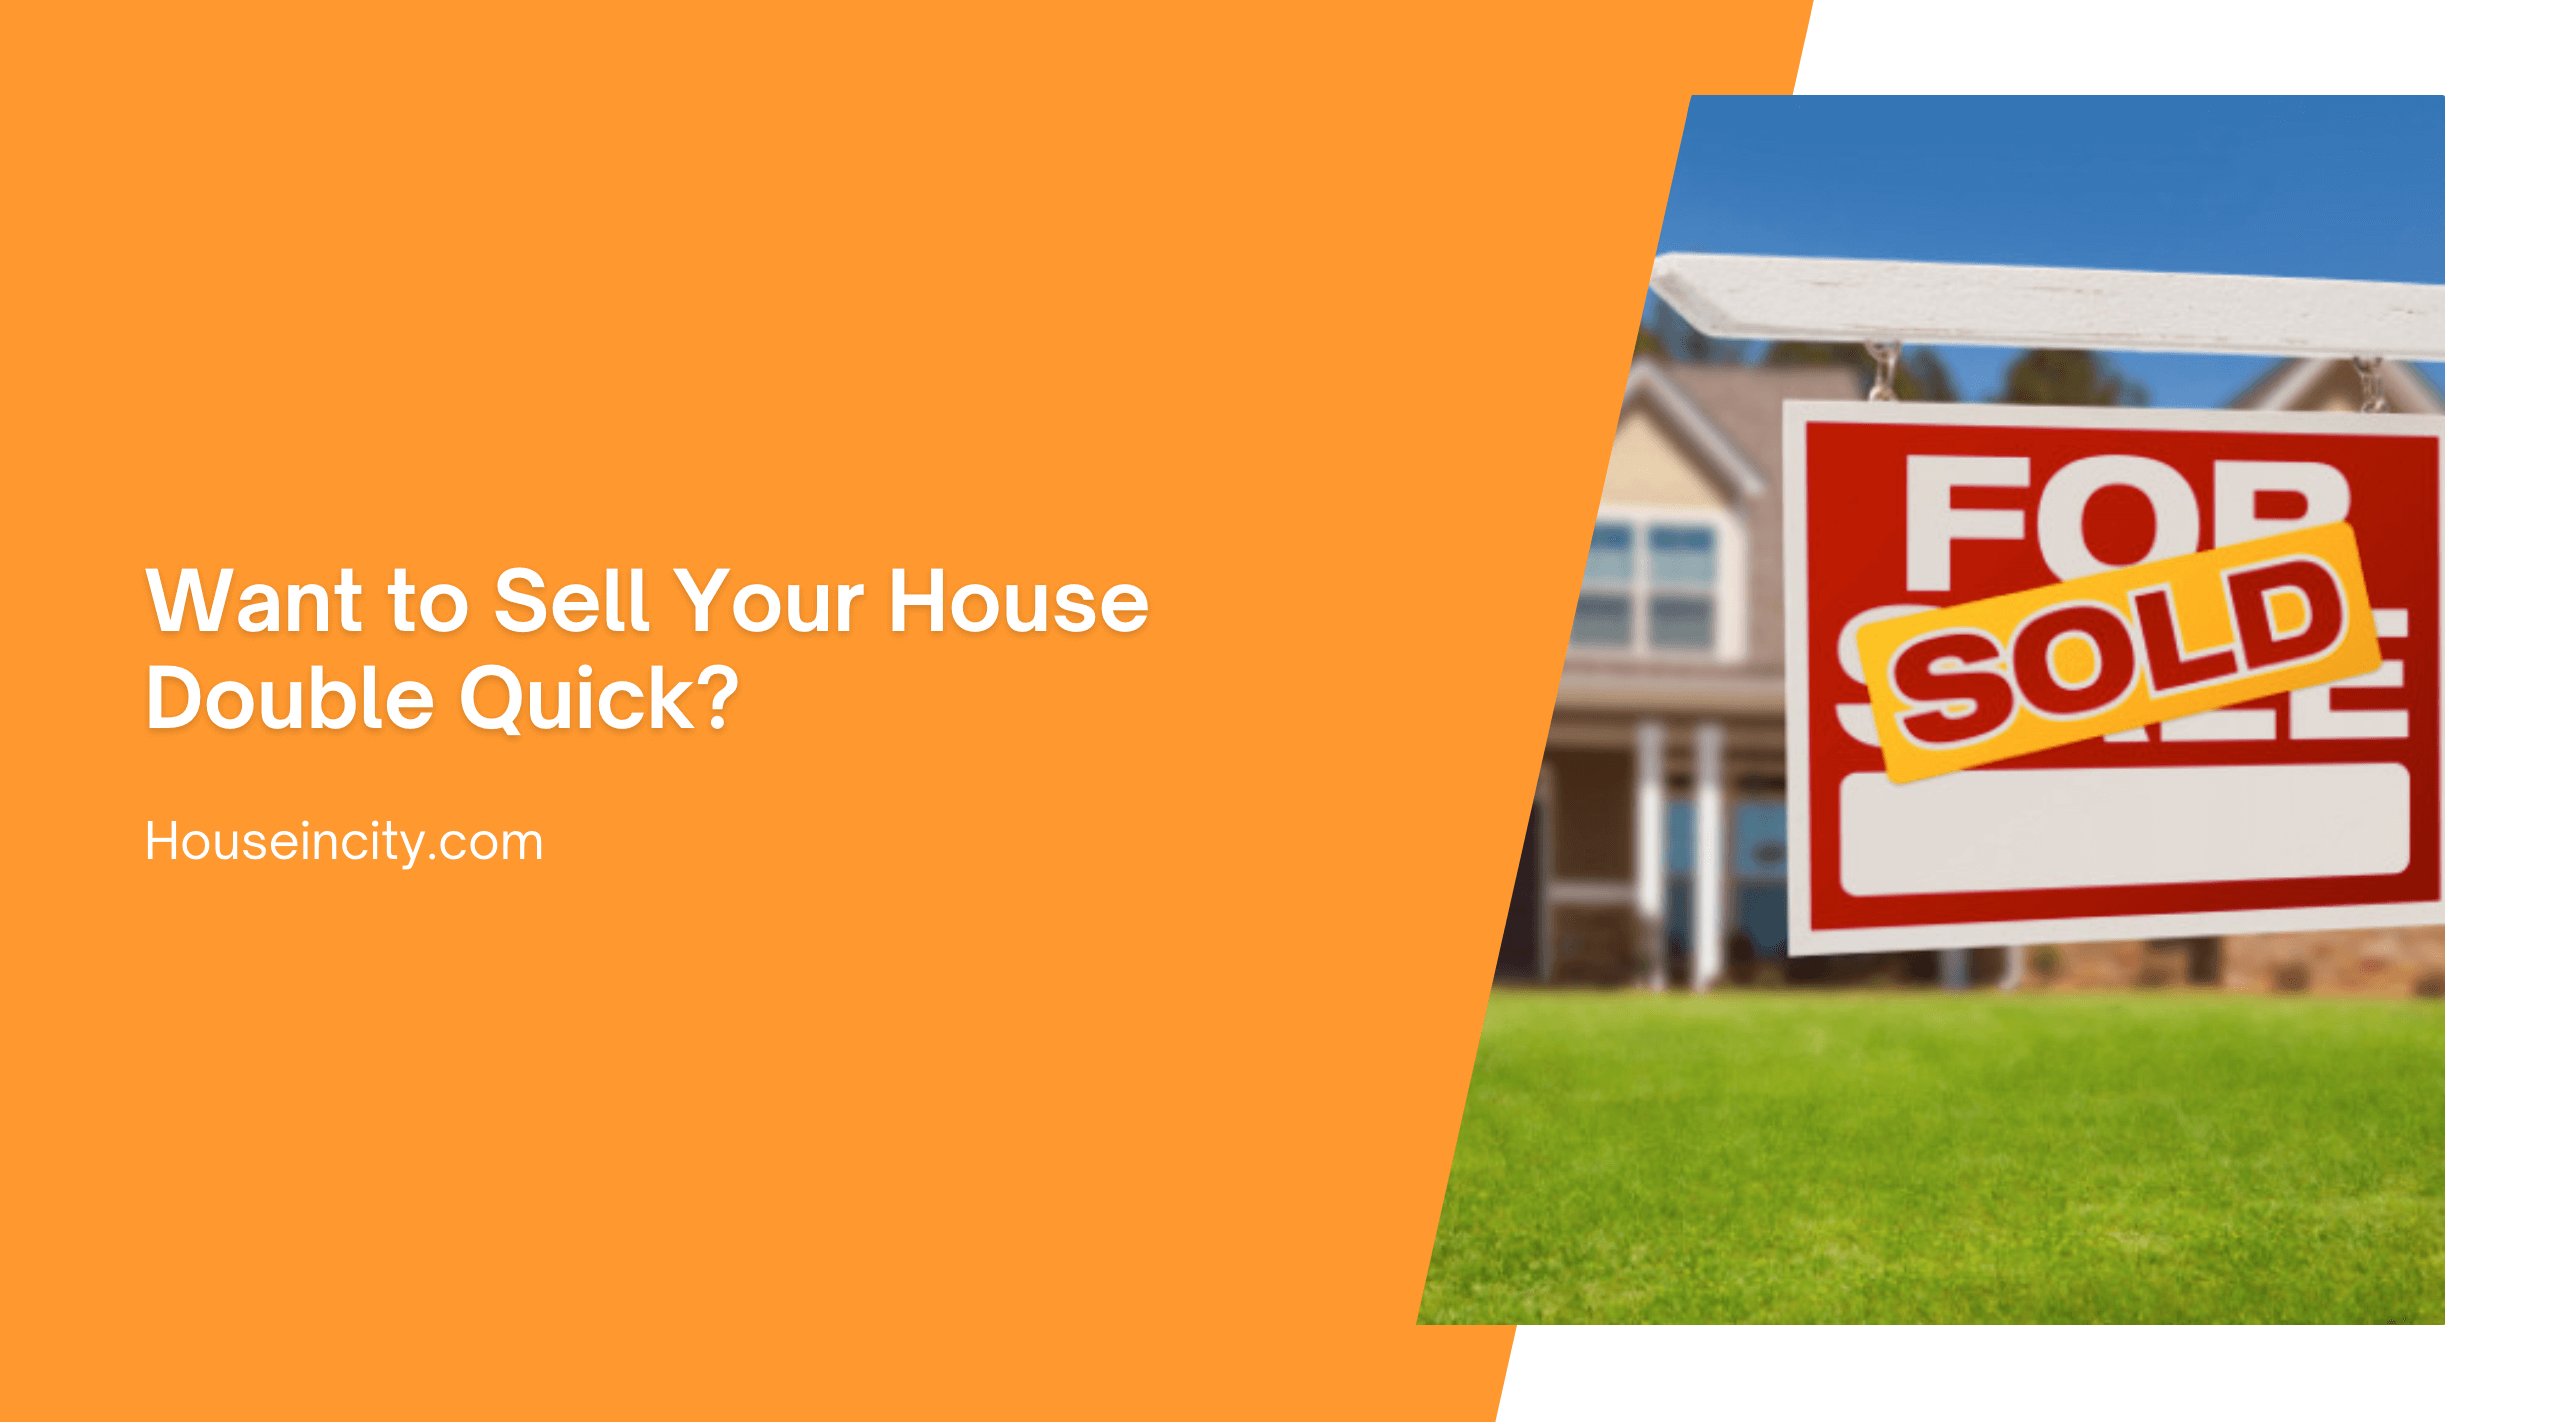 Want to Sell Your House Double Quick?